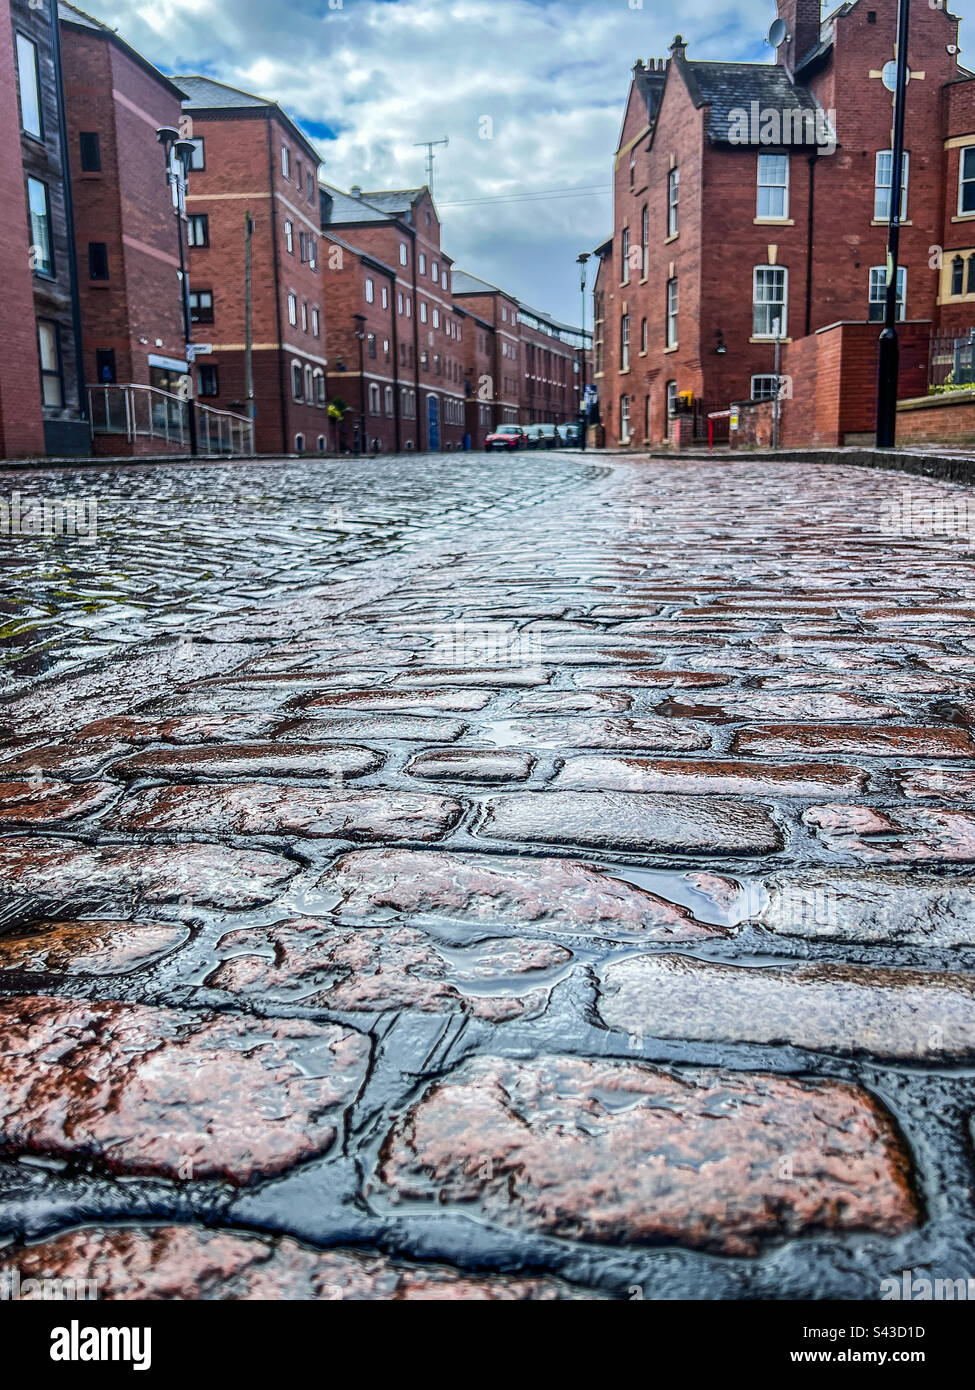 Cobbled street in the Calls in Leeds City Centre Stock Photo